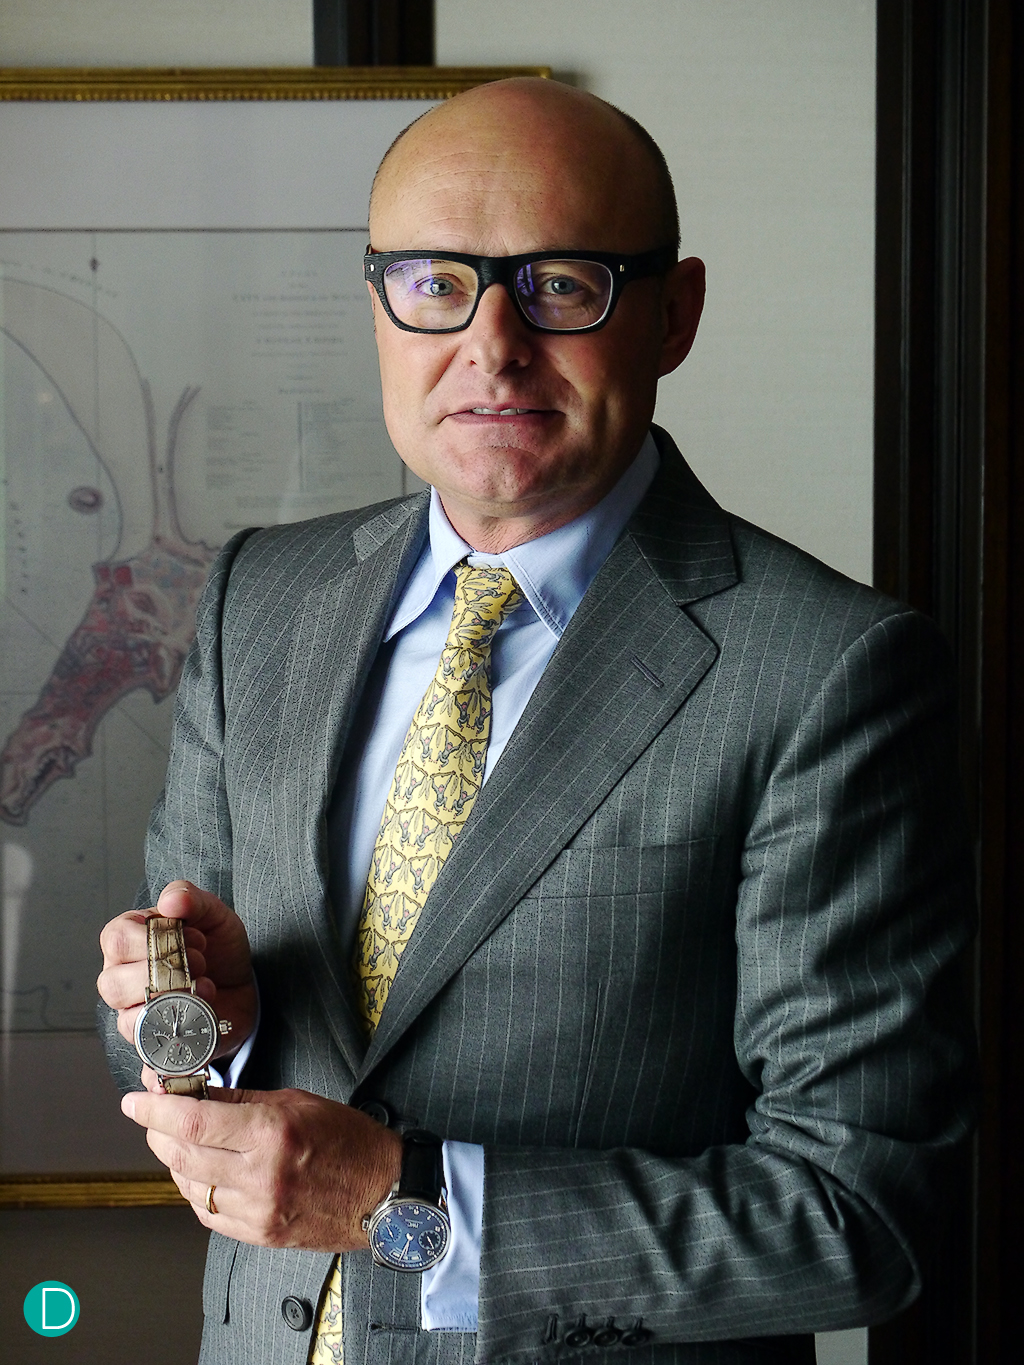 IWC CEO Georges Kern proudly showing the Portugese Monopusher Chronograph. Hong Kong, August 27, 2015.